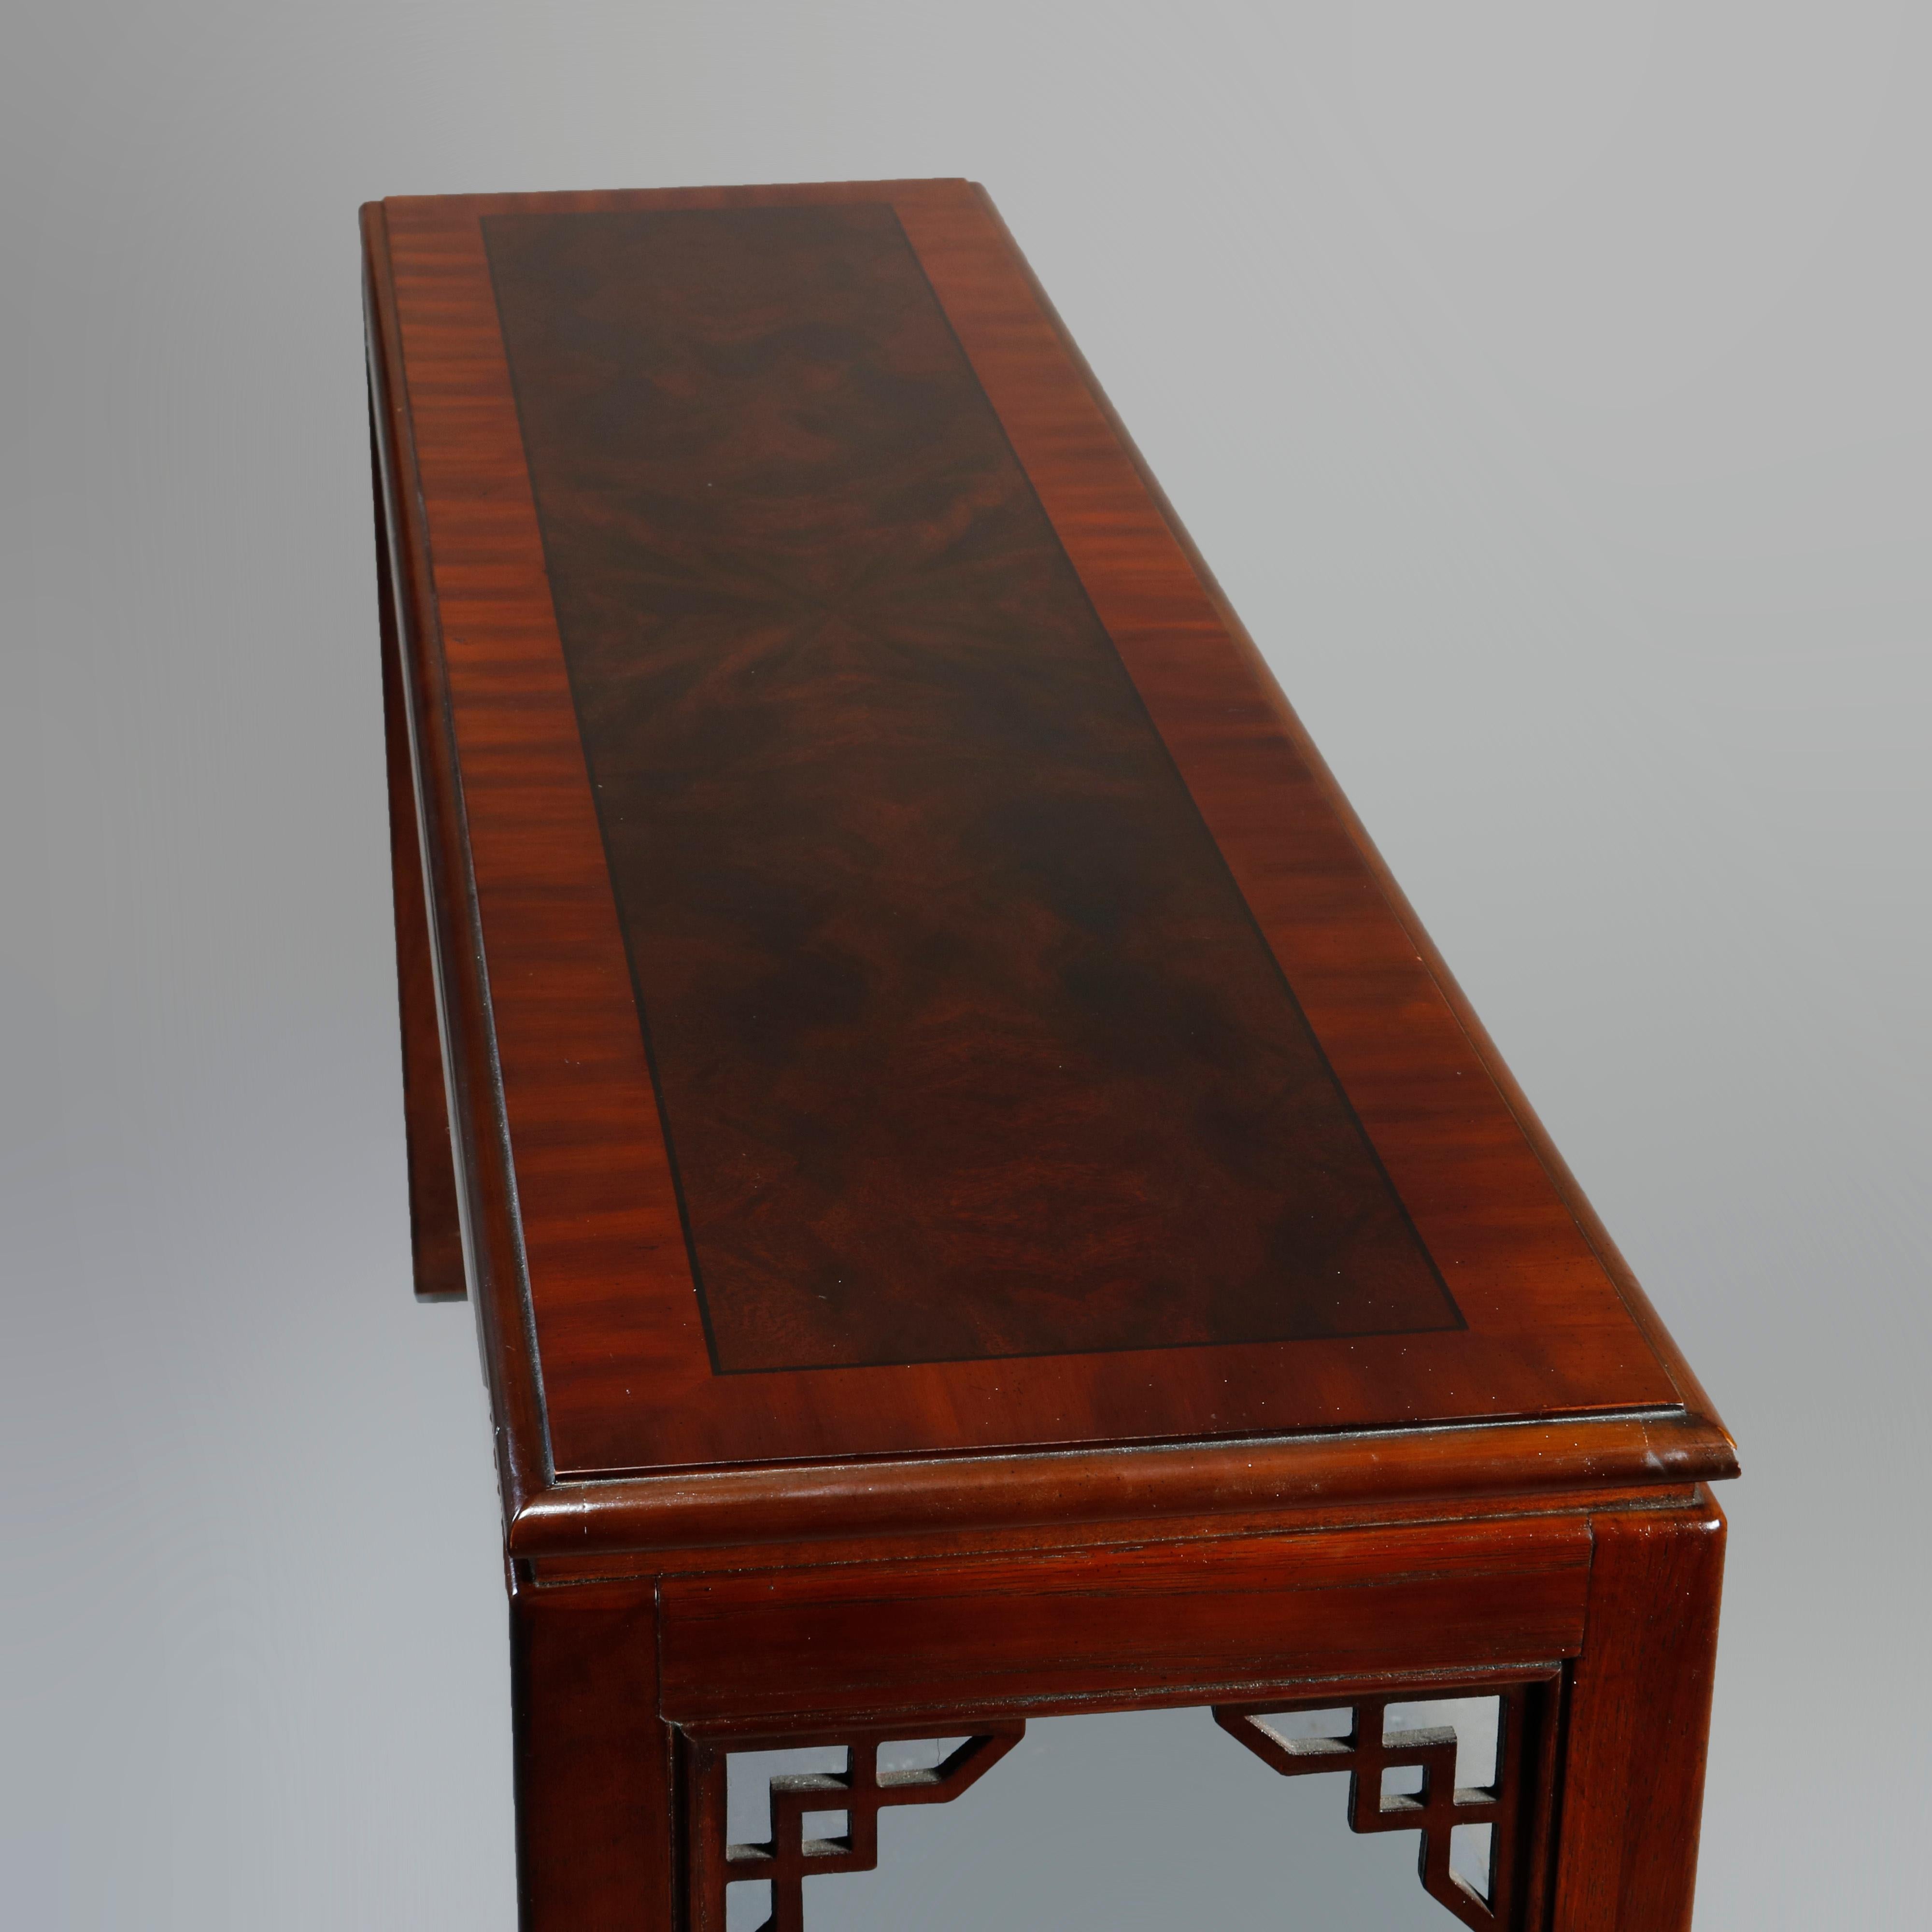 An antique Chinese Chippendale long console table by Drexel offers mahogany and burl crossbanded top with ebonized trimming over base with cutout corbels and raised on straight and square legs, 20th century

Measures: 27